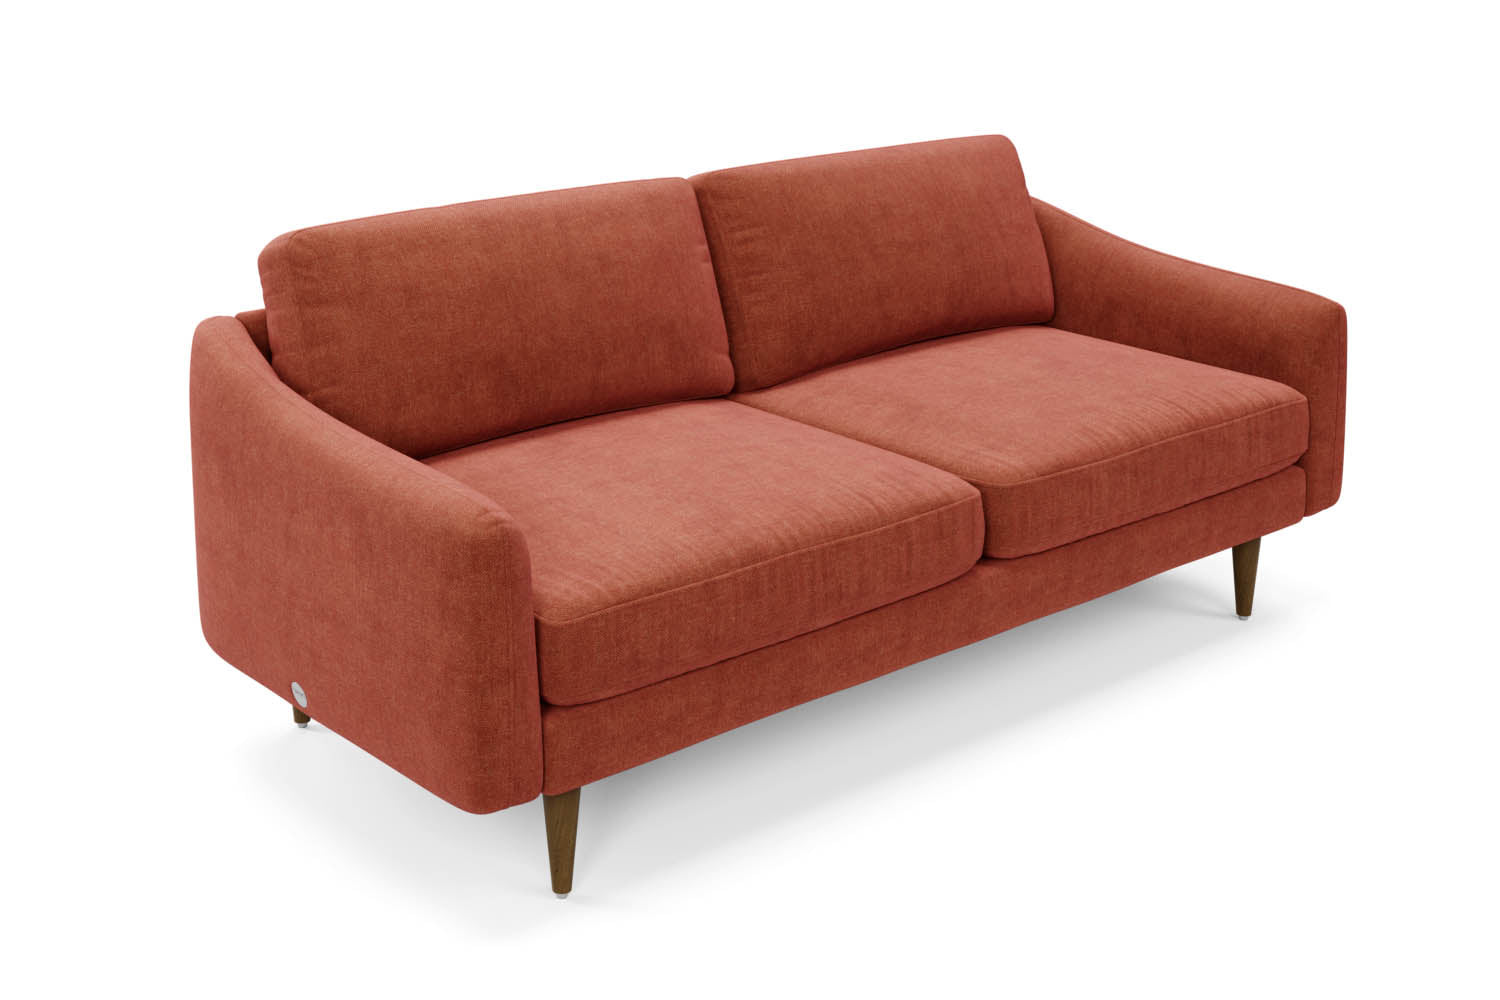 The Rebel 3 Seater Sofa in Spice with brown legs